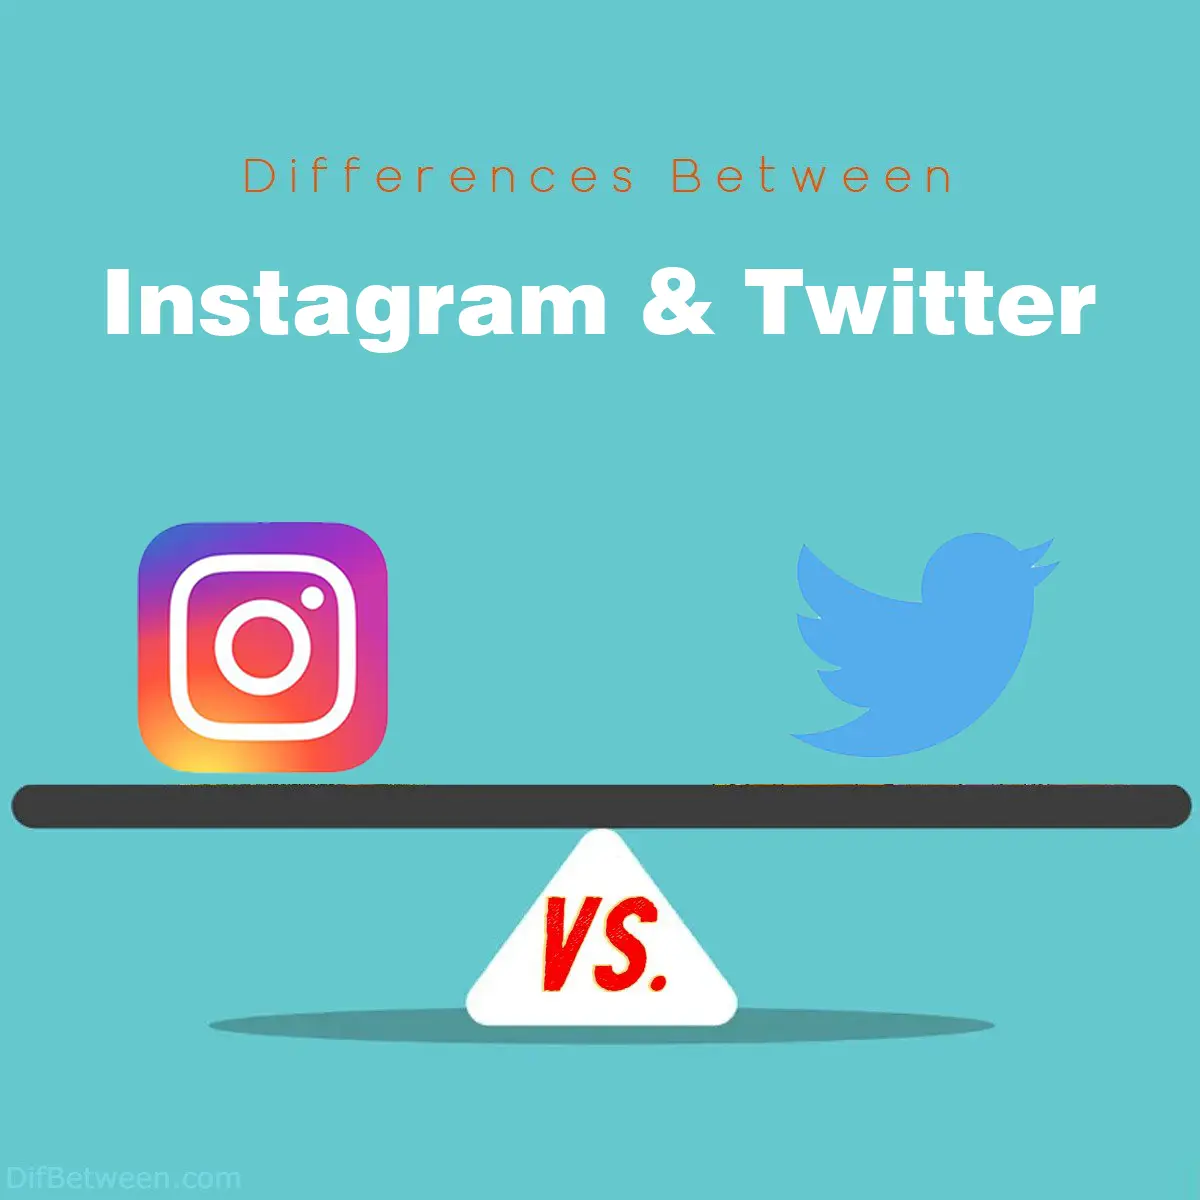 Differences Between Instagram and Twitter